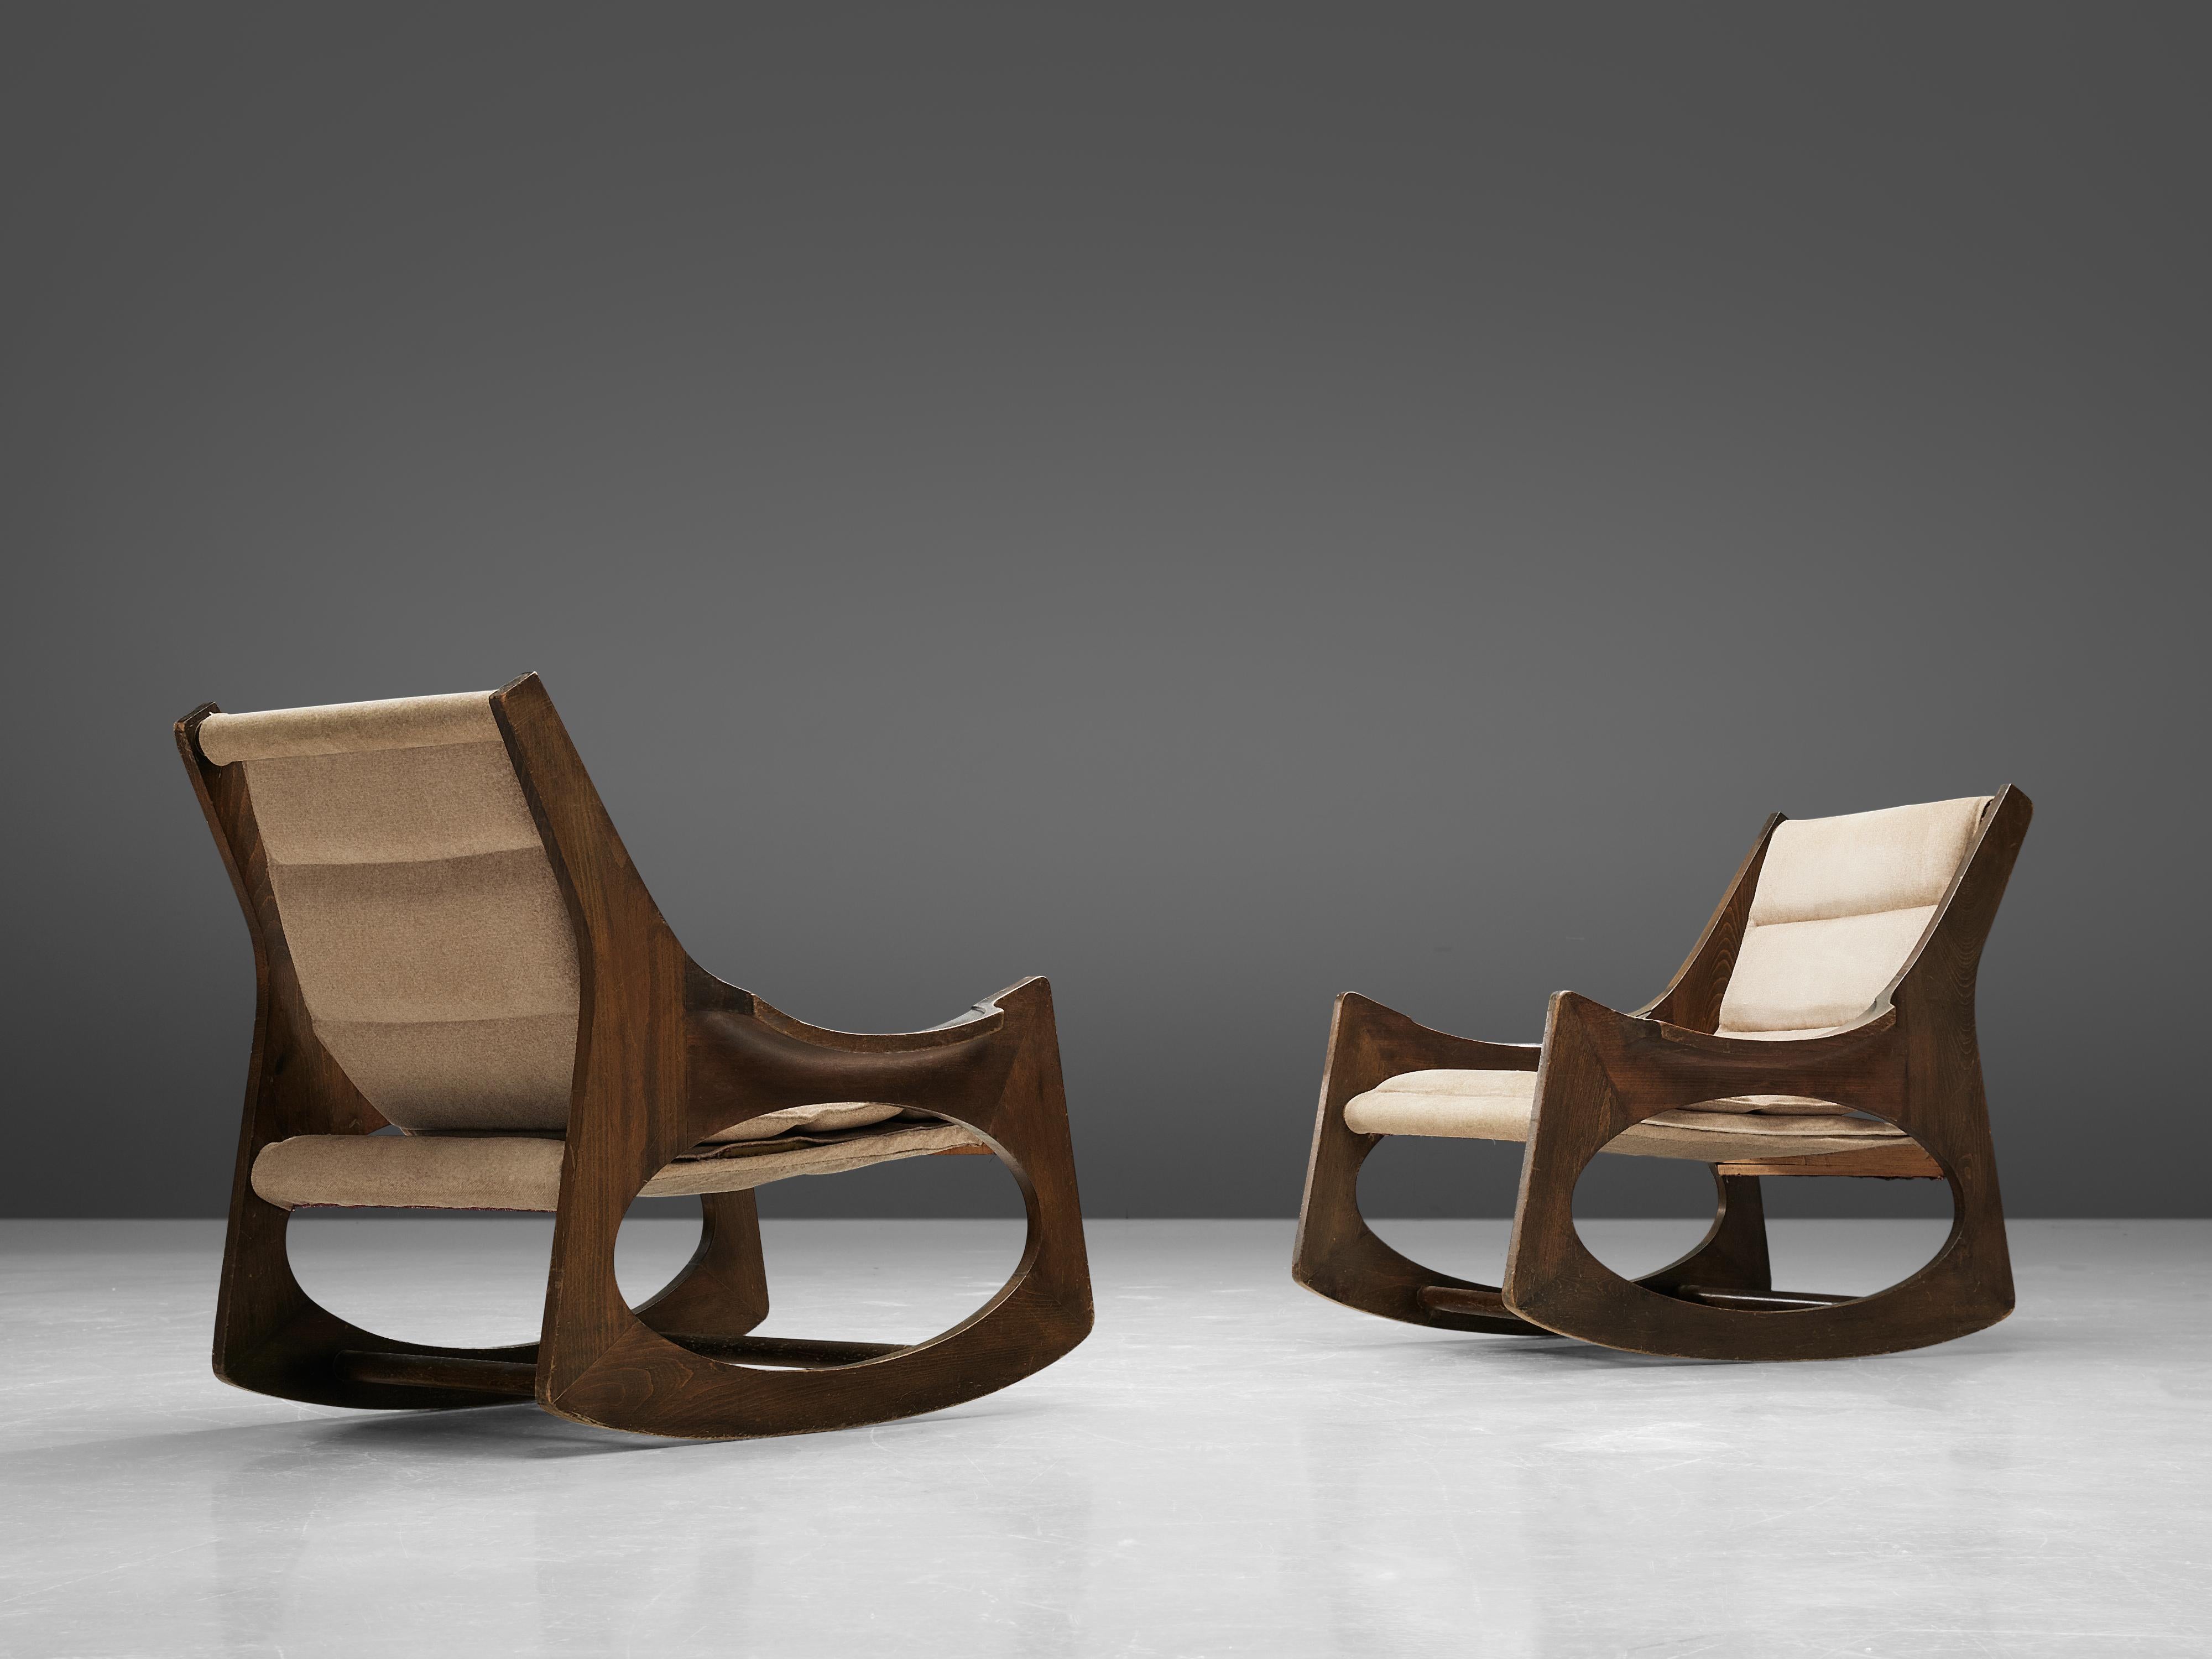 Jordi Vilanova i Bosch,' pair of Tartera' rocking chairs, boxwood, beech, and fabric, Spain, design 1966, manufacture 1960s.

These two wonderful rocking chairs are made of two symmetrical side pieces, which integrate the structure of the backrest,